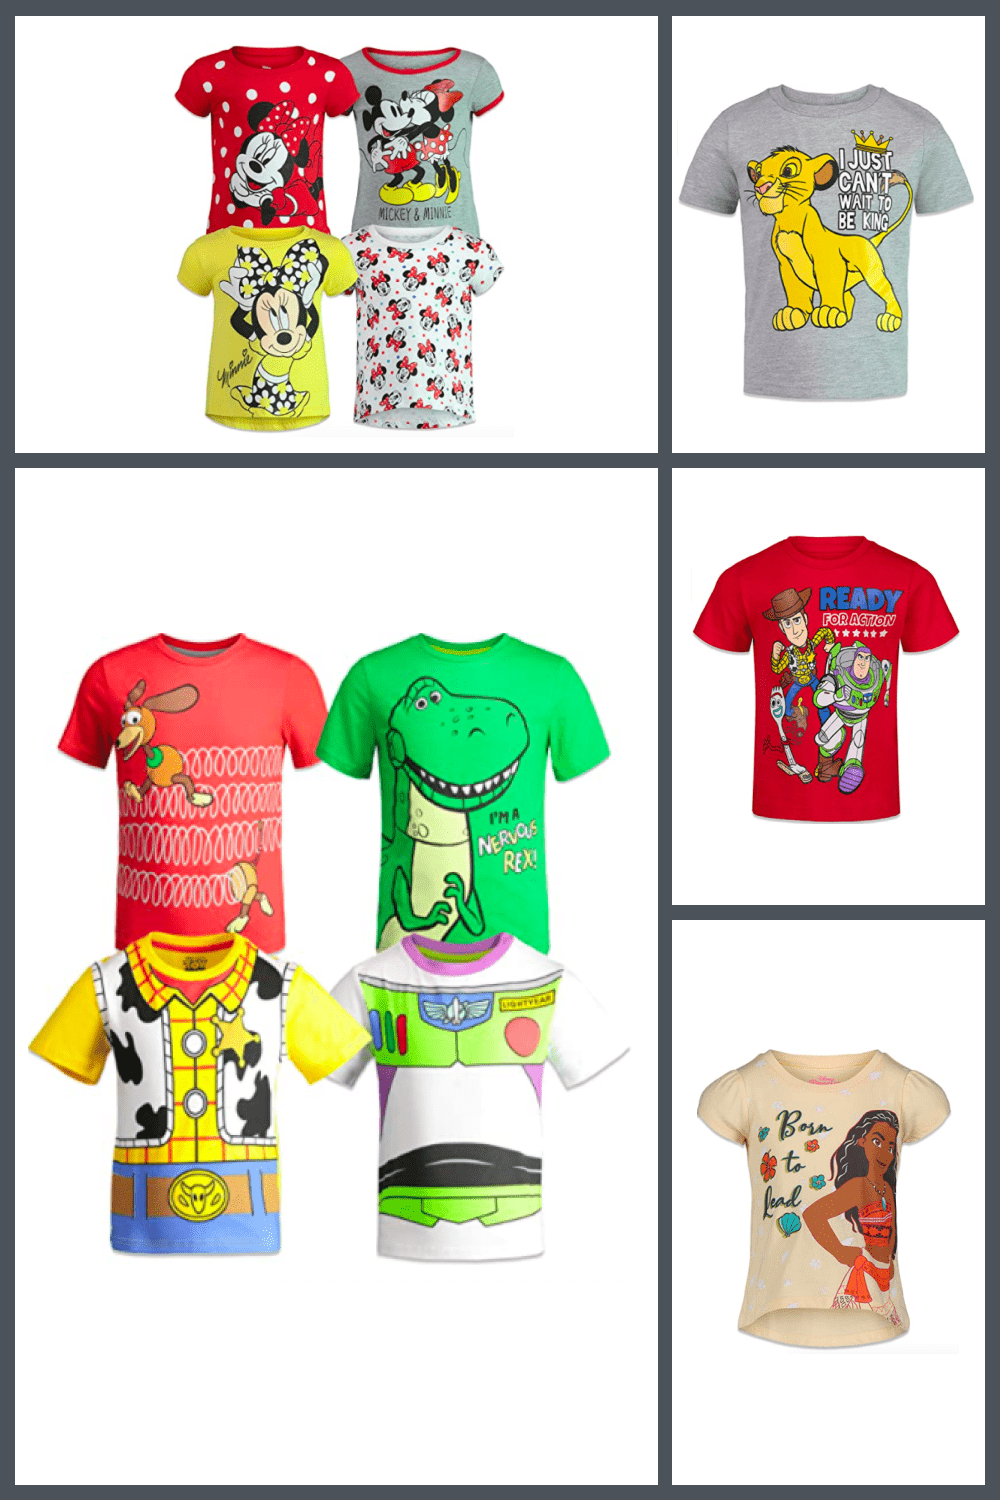 Cartoon T-shirts with various funny pictures.